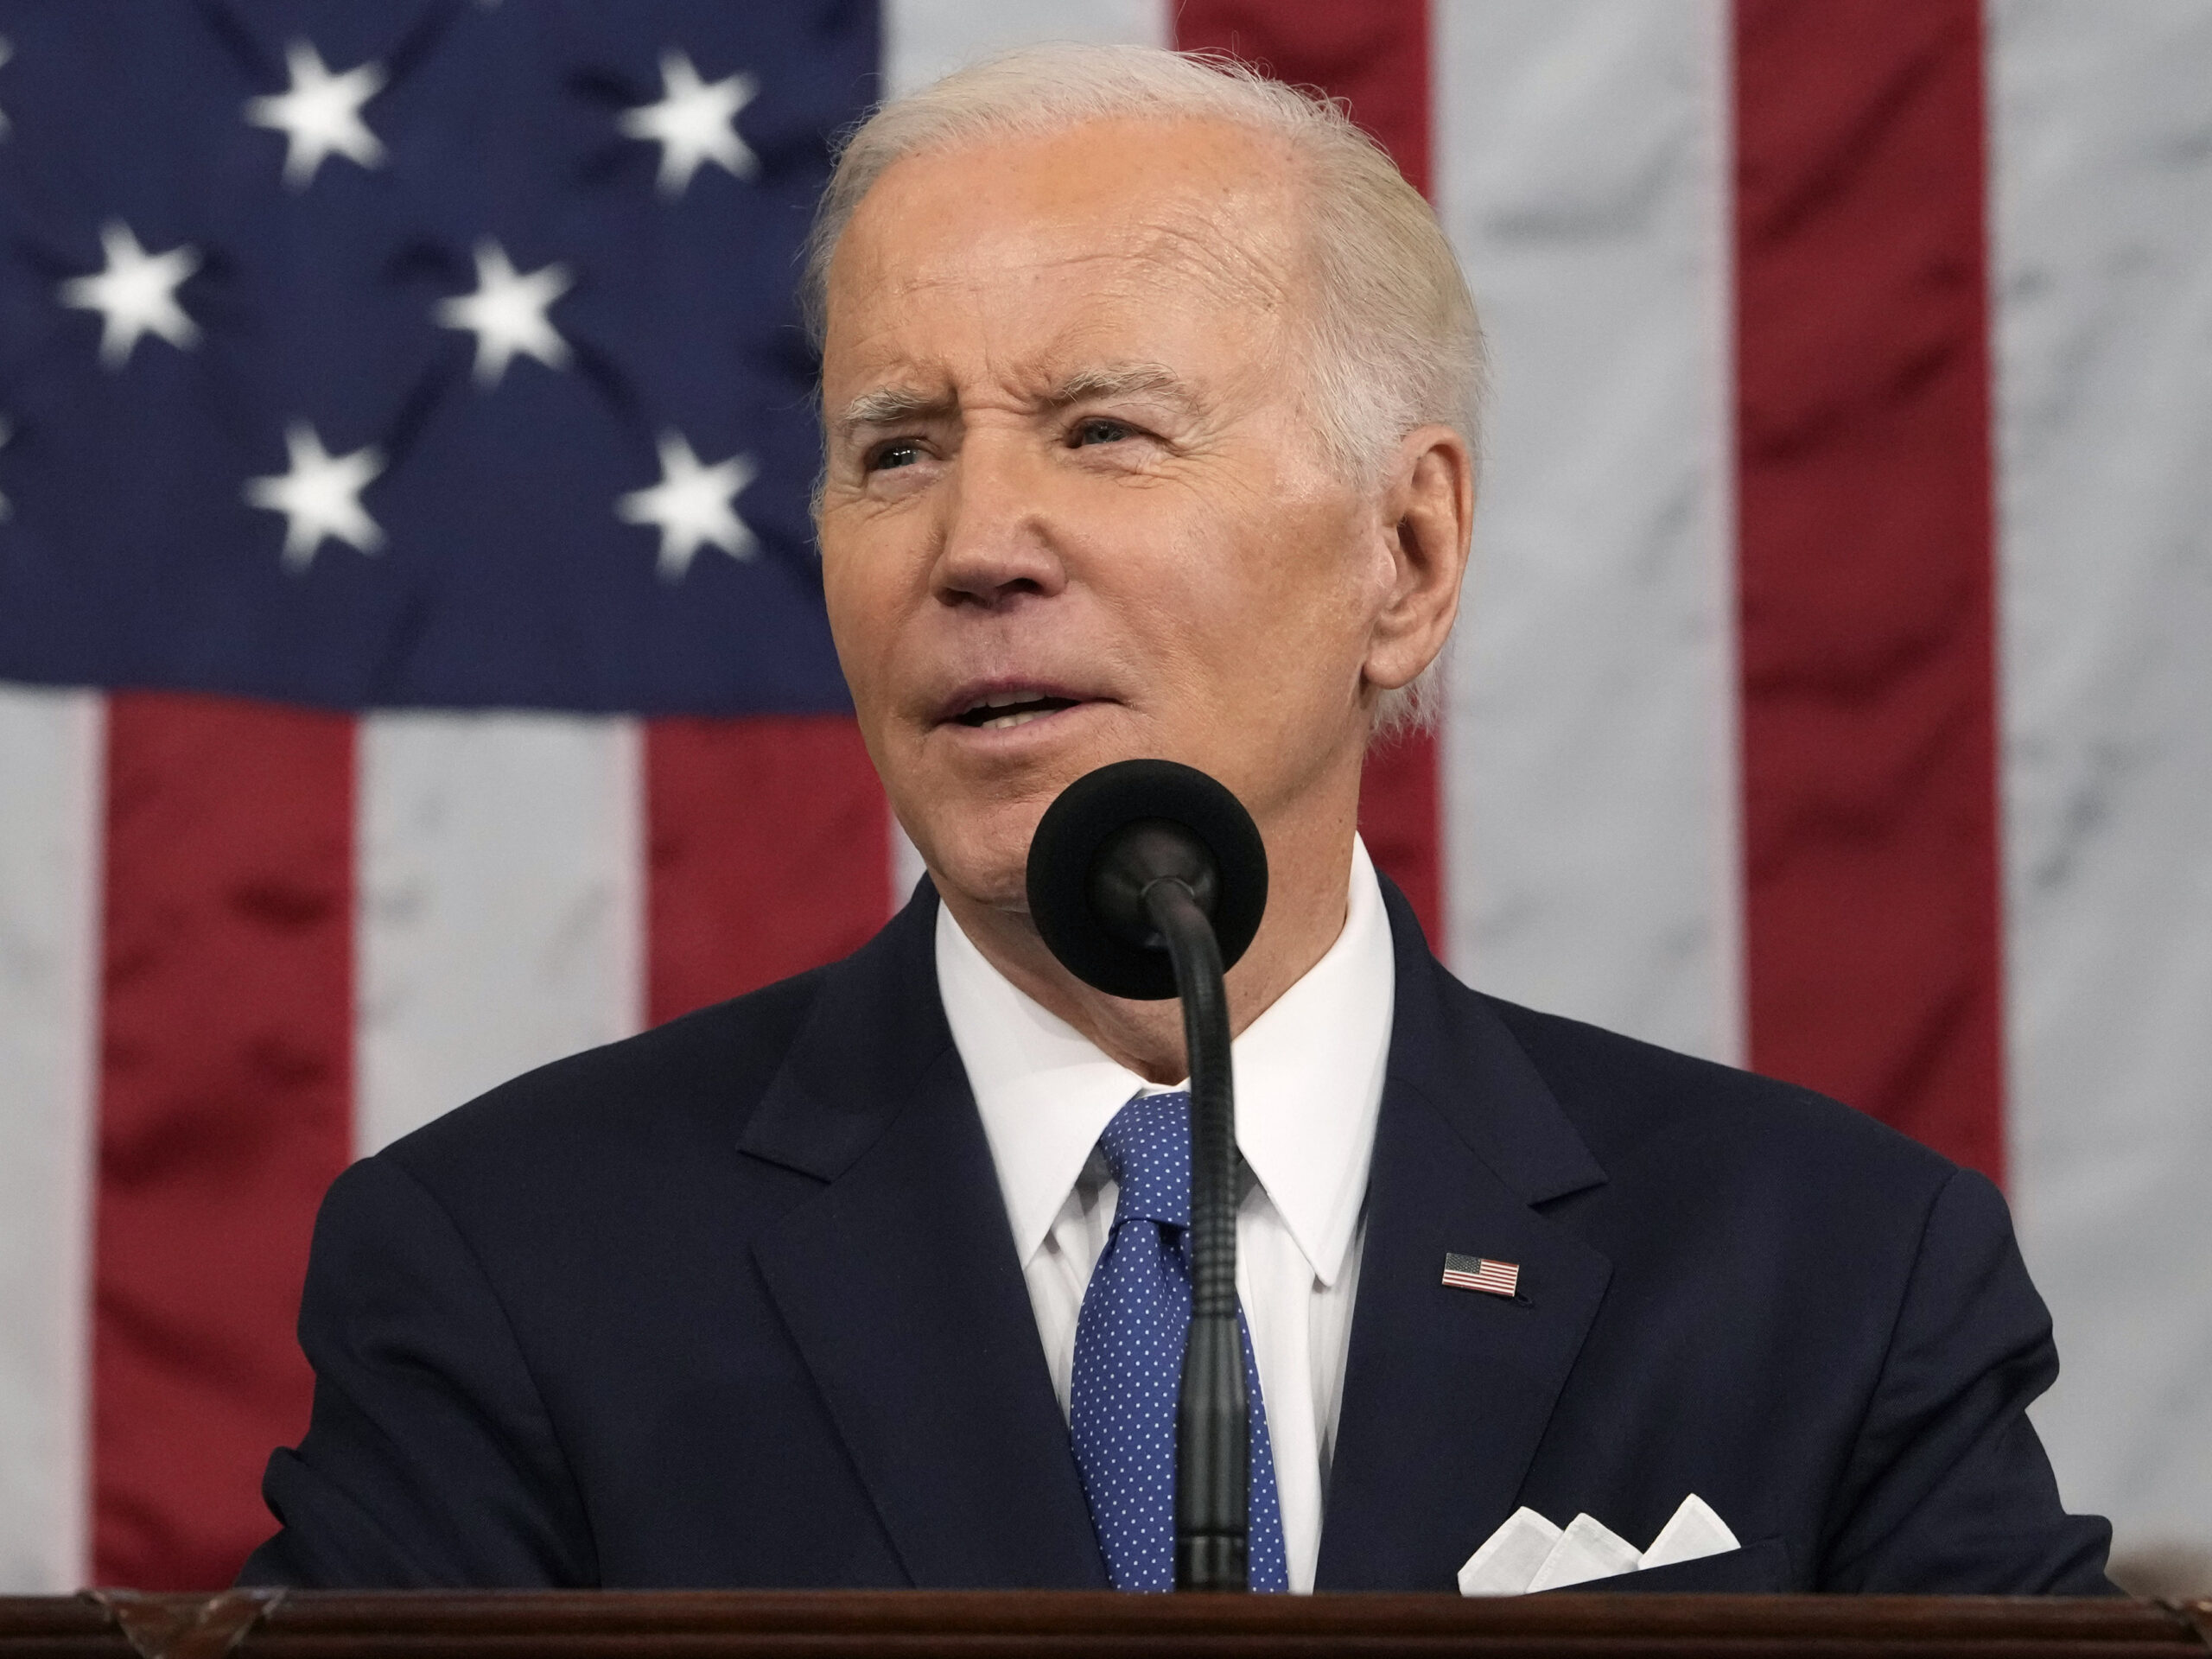 President Biden’s State of the Union speech faces dual political challenges